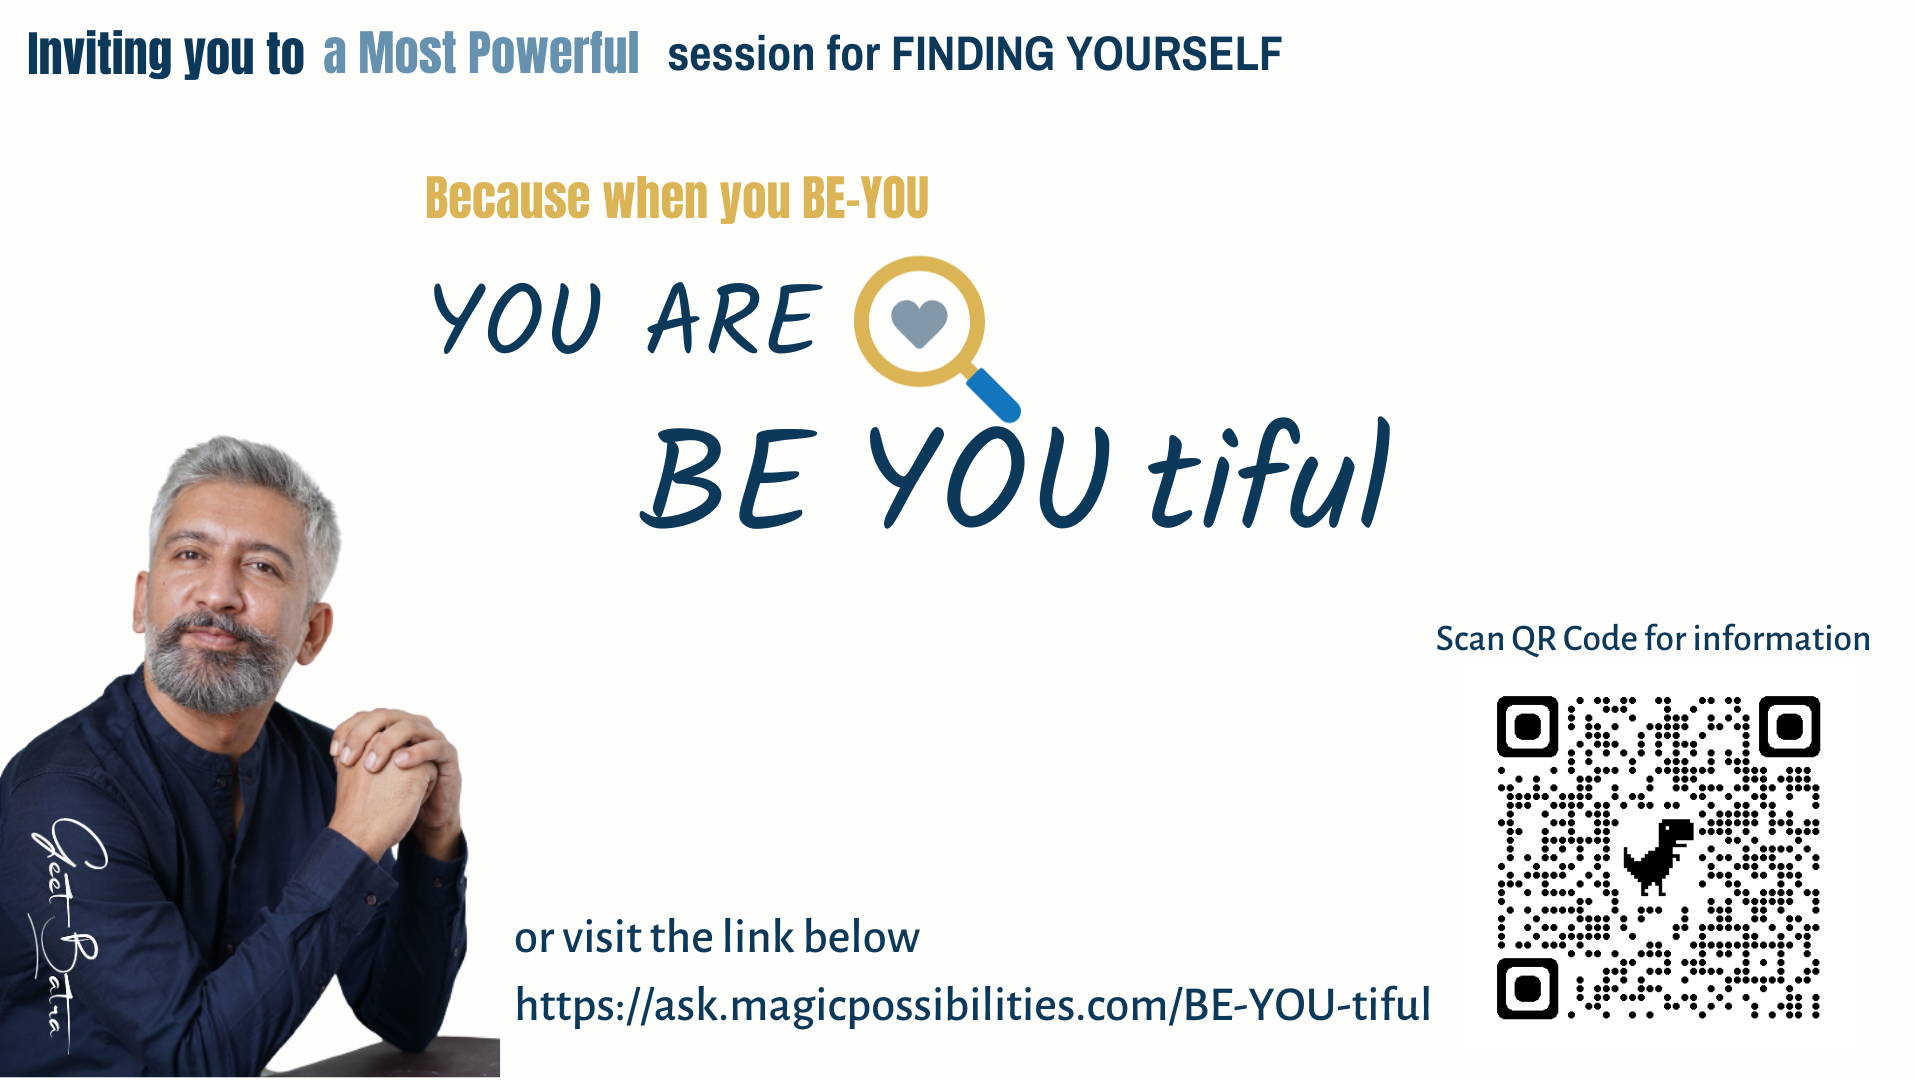 You are BE-YOU-tiful (Personal 3 Hours Self Discovery Session)